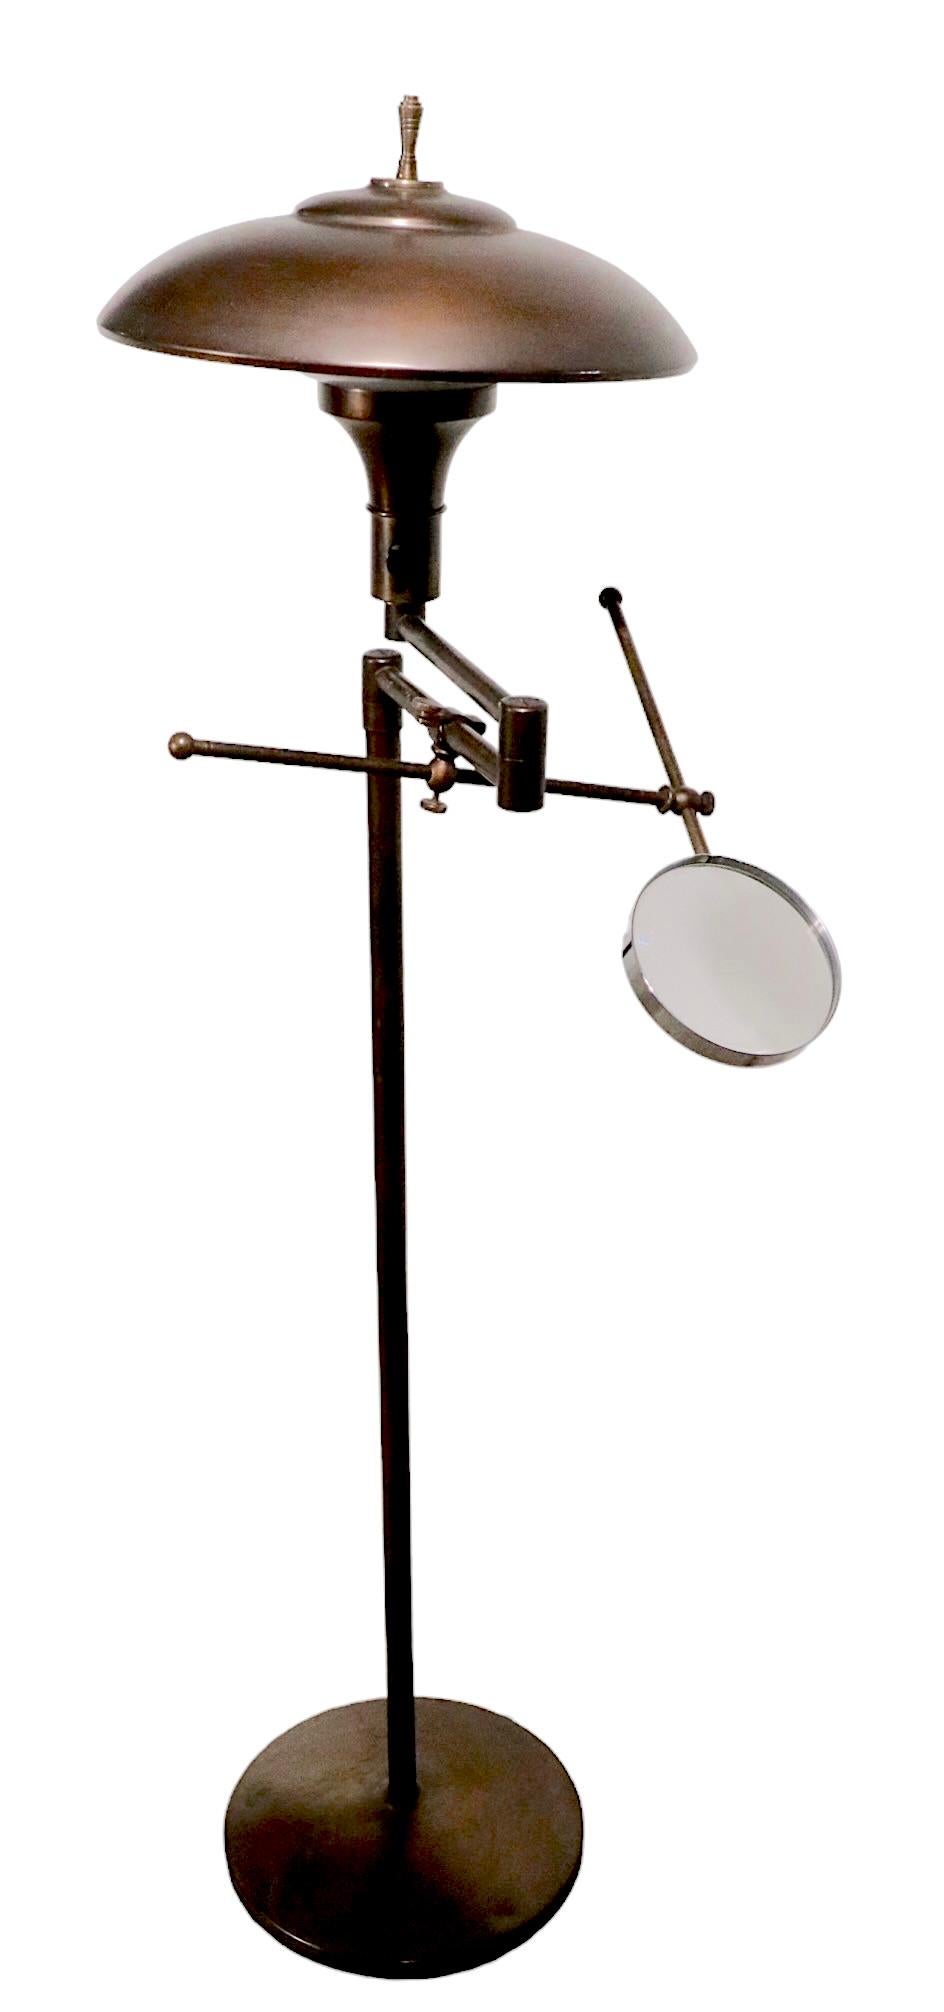 Adjustable Floor Lamp with Magnifying Glass, Faries Lamp Co. circa 1920-1940 For Sale 3